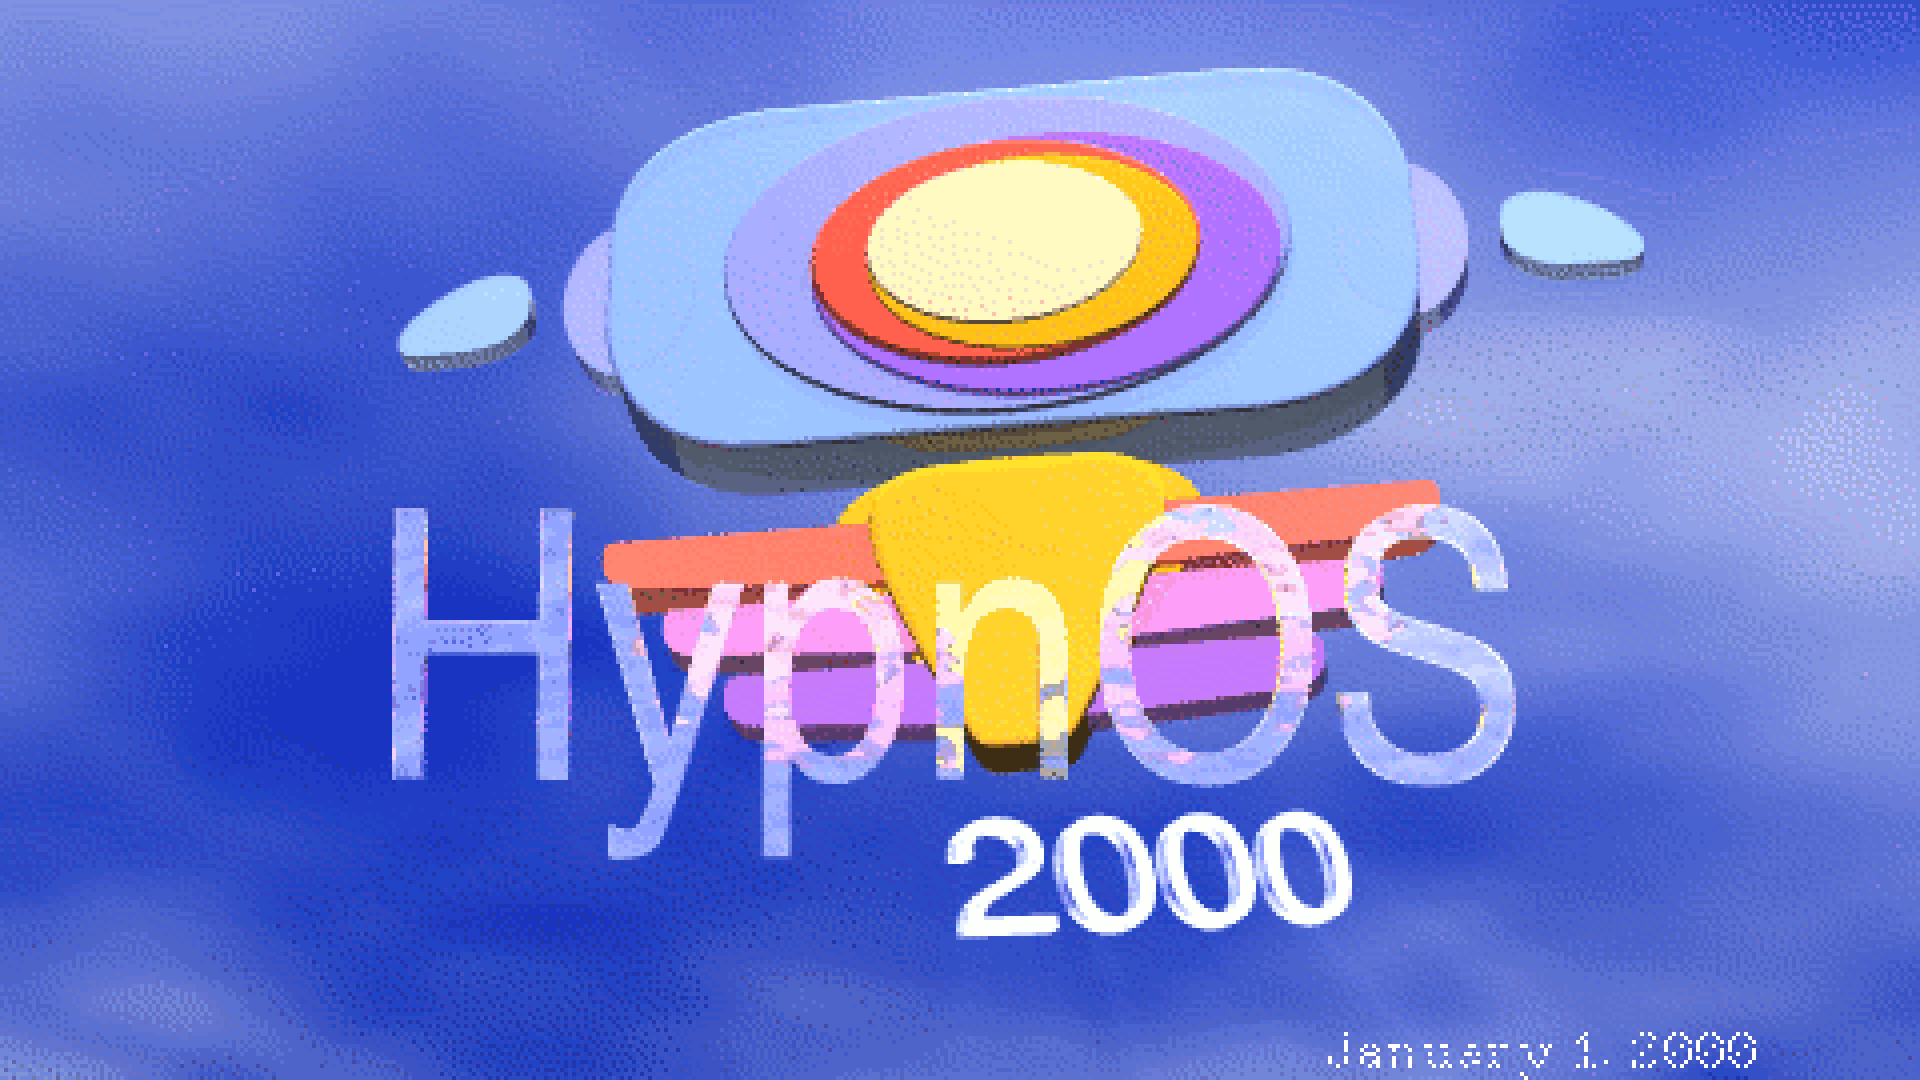 hypnospace outlaws